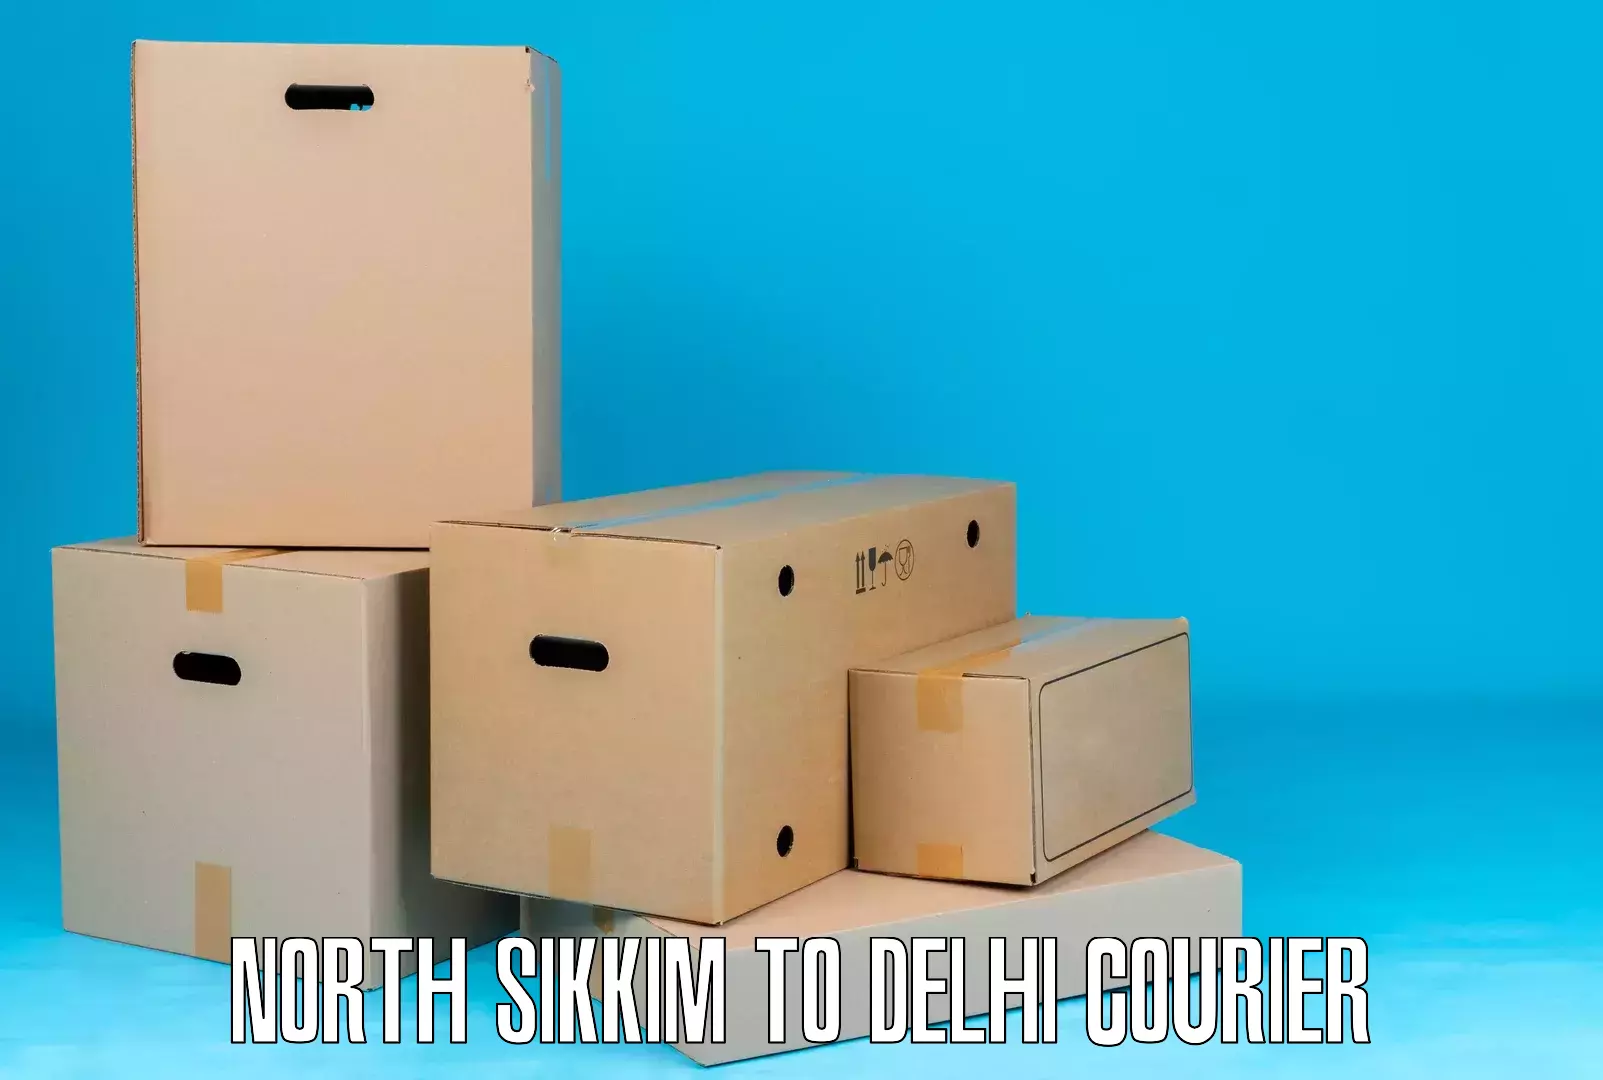 Multi-carrier shipping North Sikkim to Indraprastha